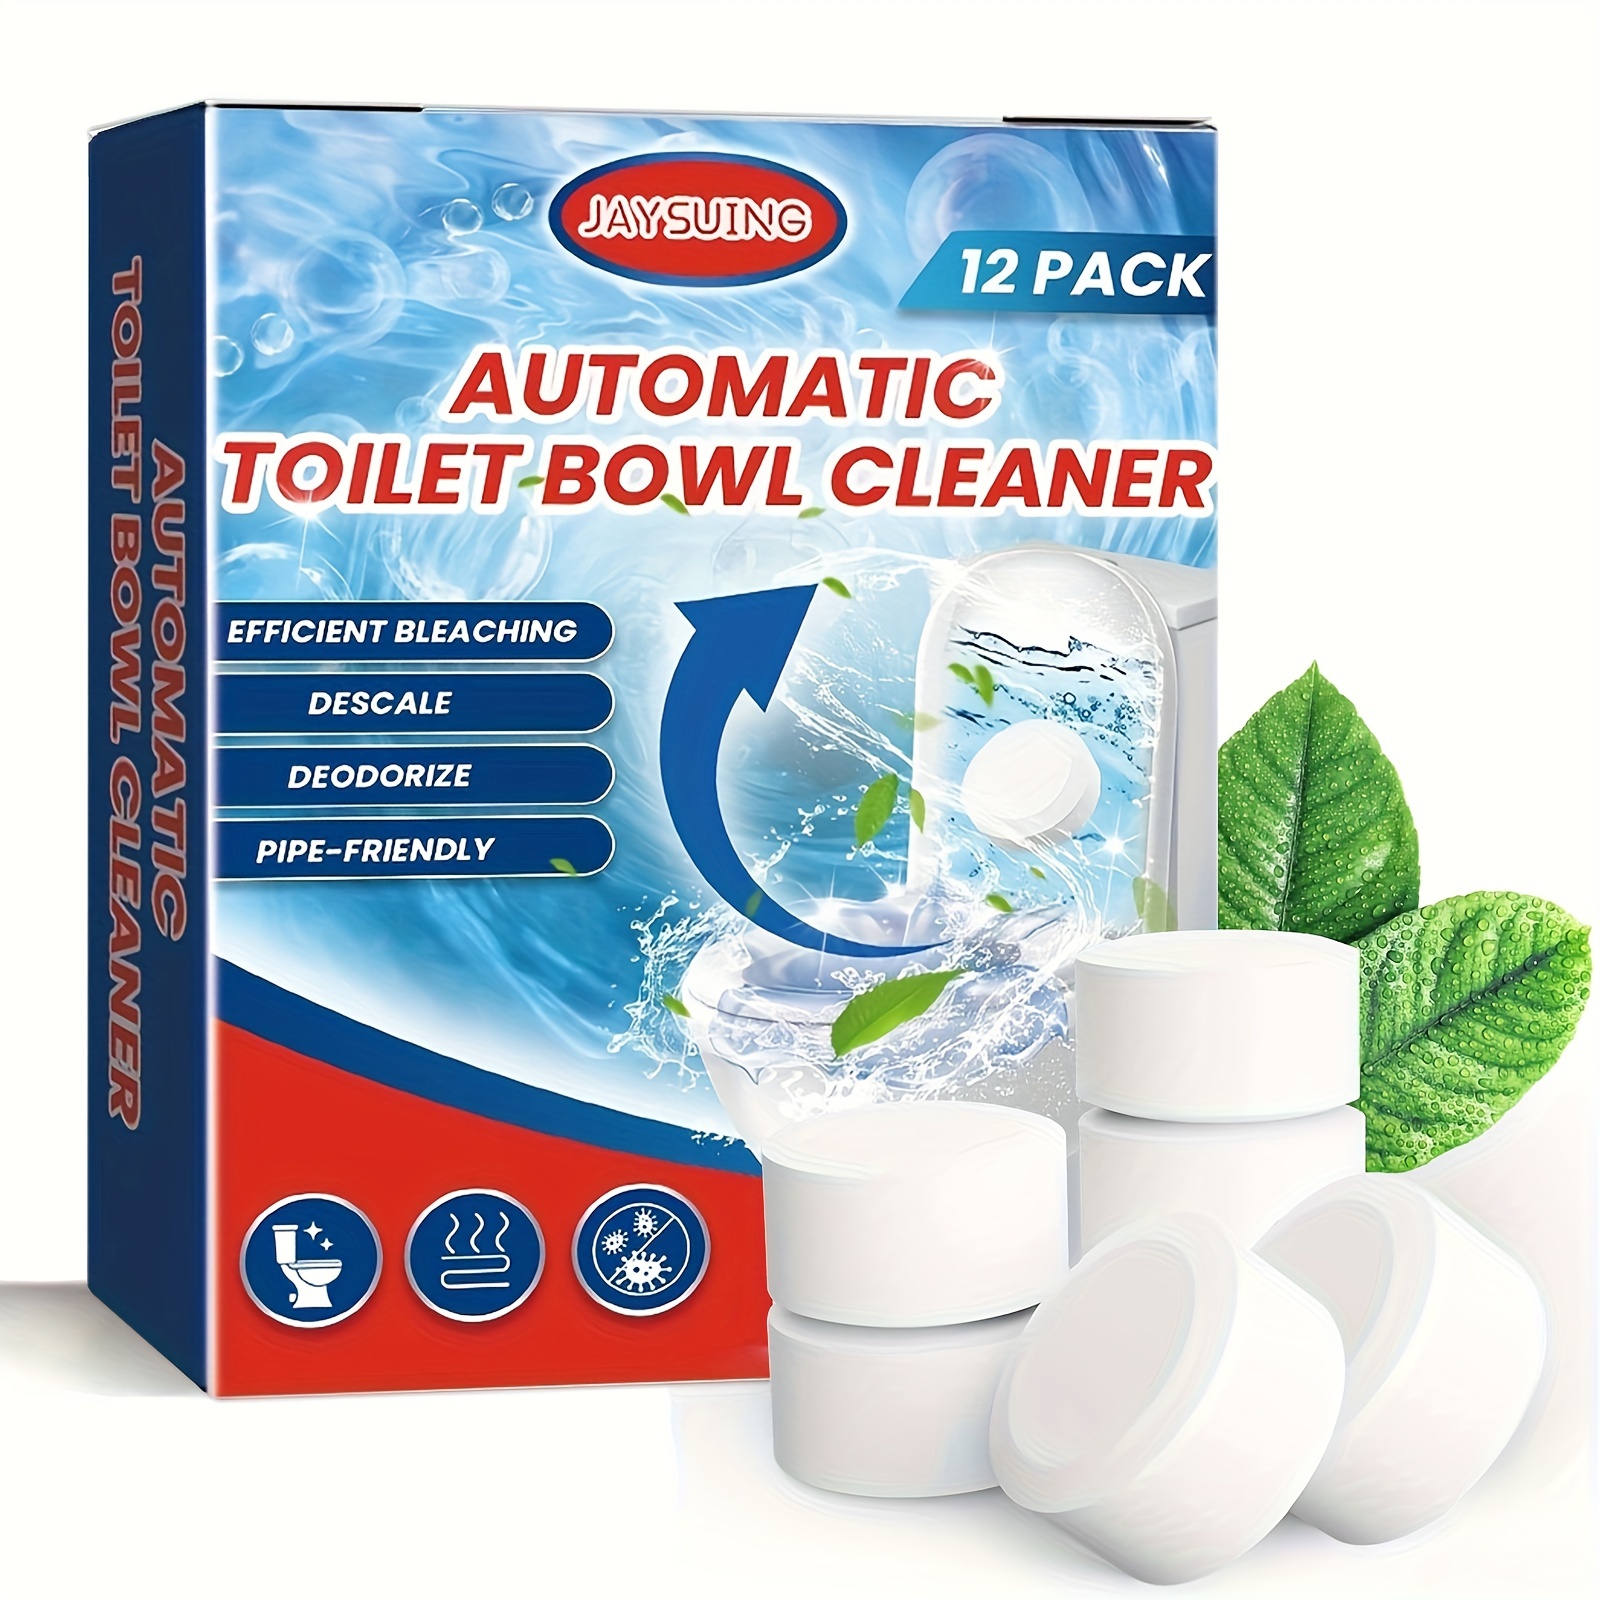 

12pcs/box, Toilet Bowl Cleaner Tablets, Automatic Toilet Bowl Cleaners With Bleach, Sustained-release Toilet Tank Cleaners For Deodorizing Descaling